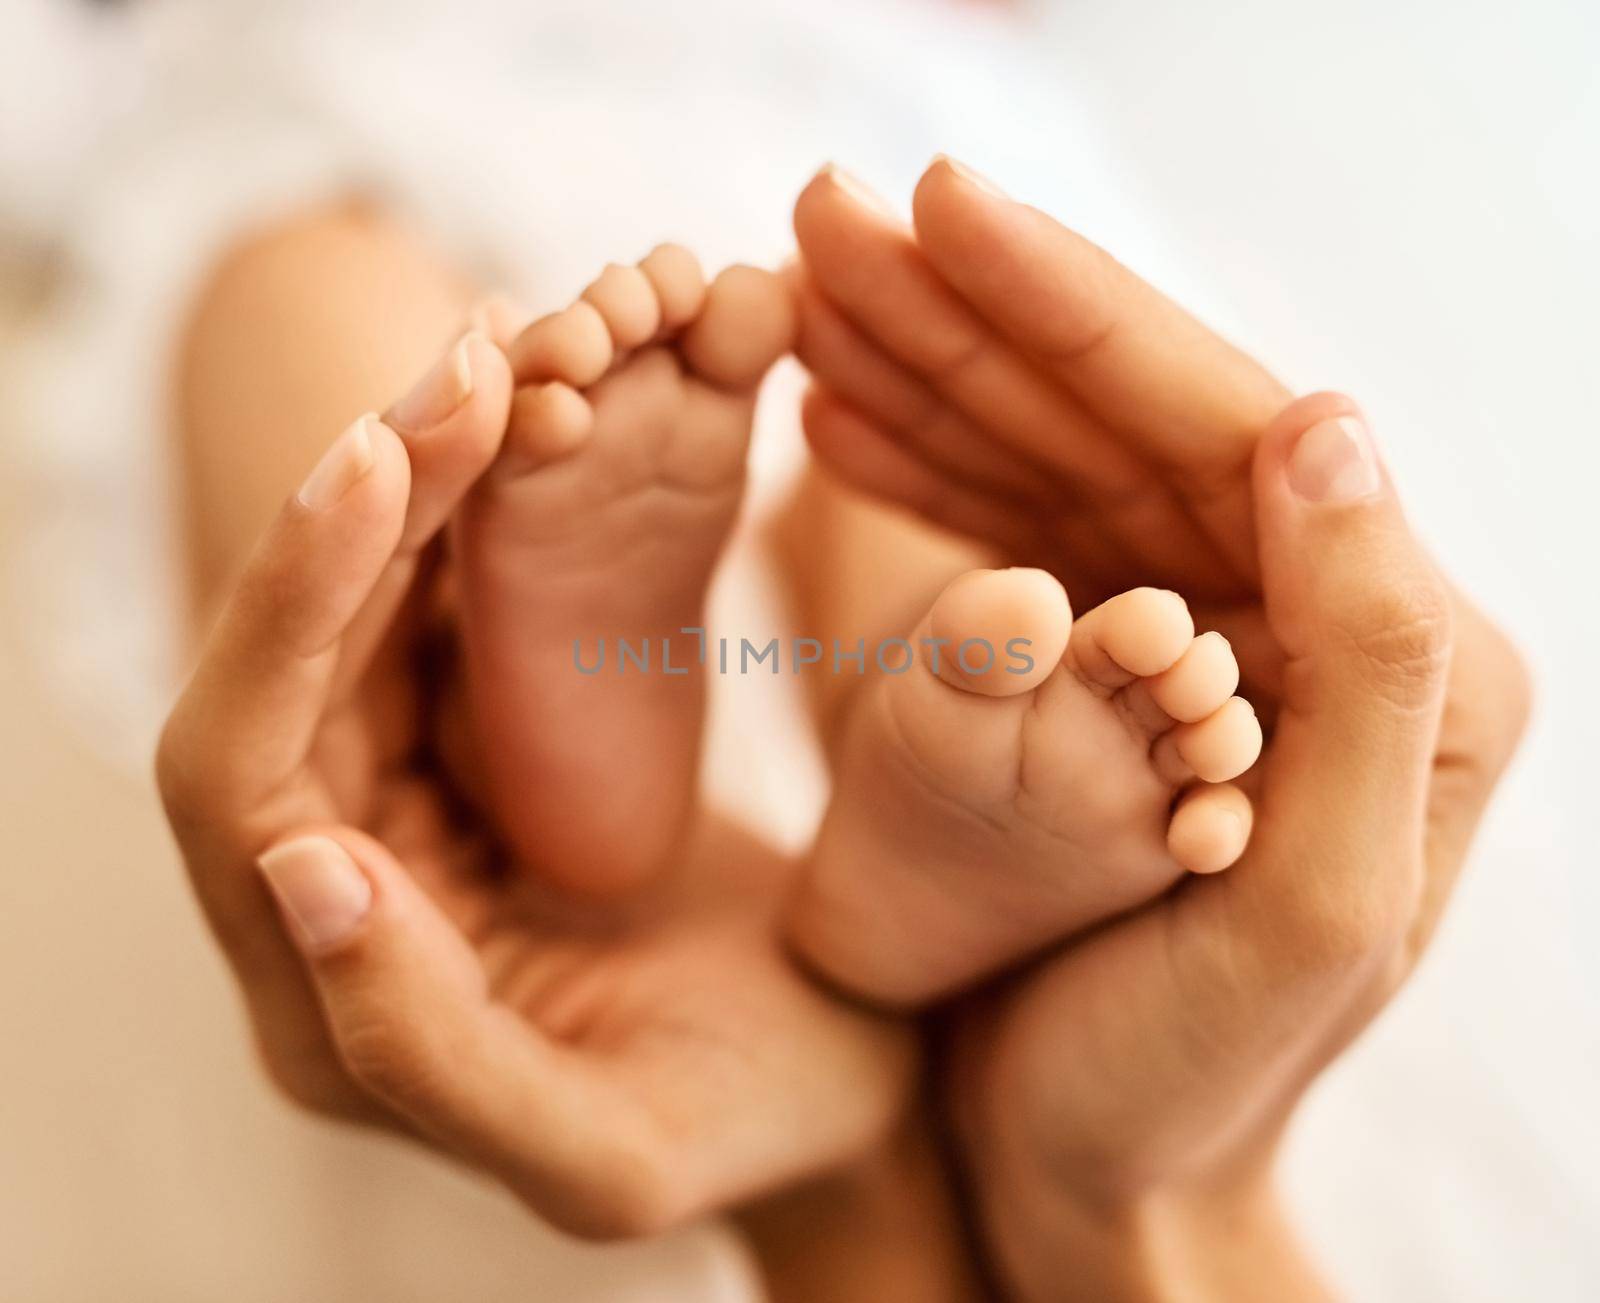 The tiny feet that made her life complete. a mother gently holding her babys feet